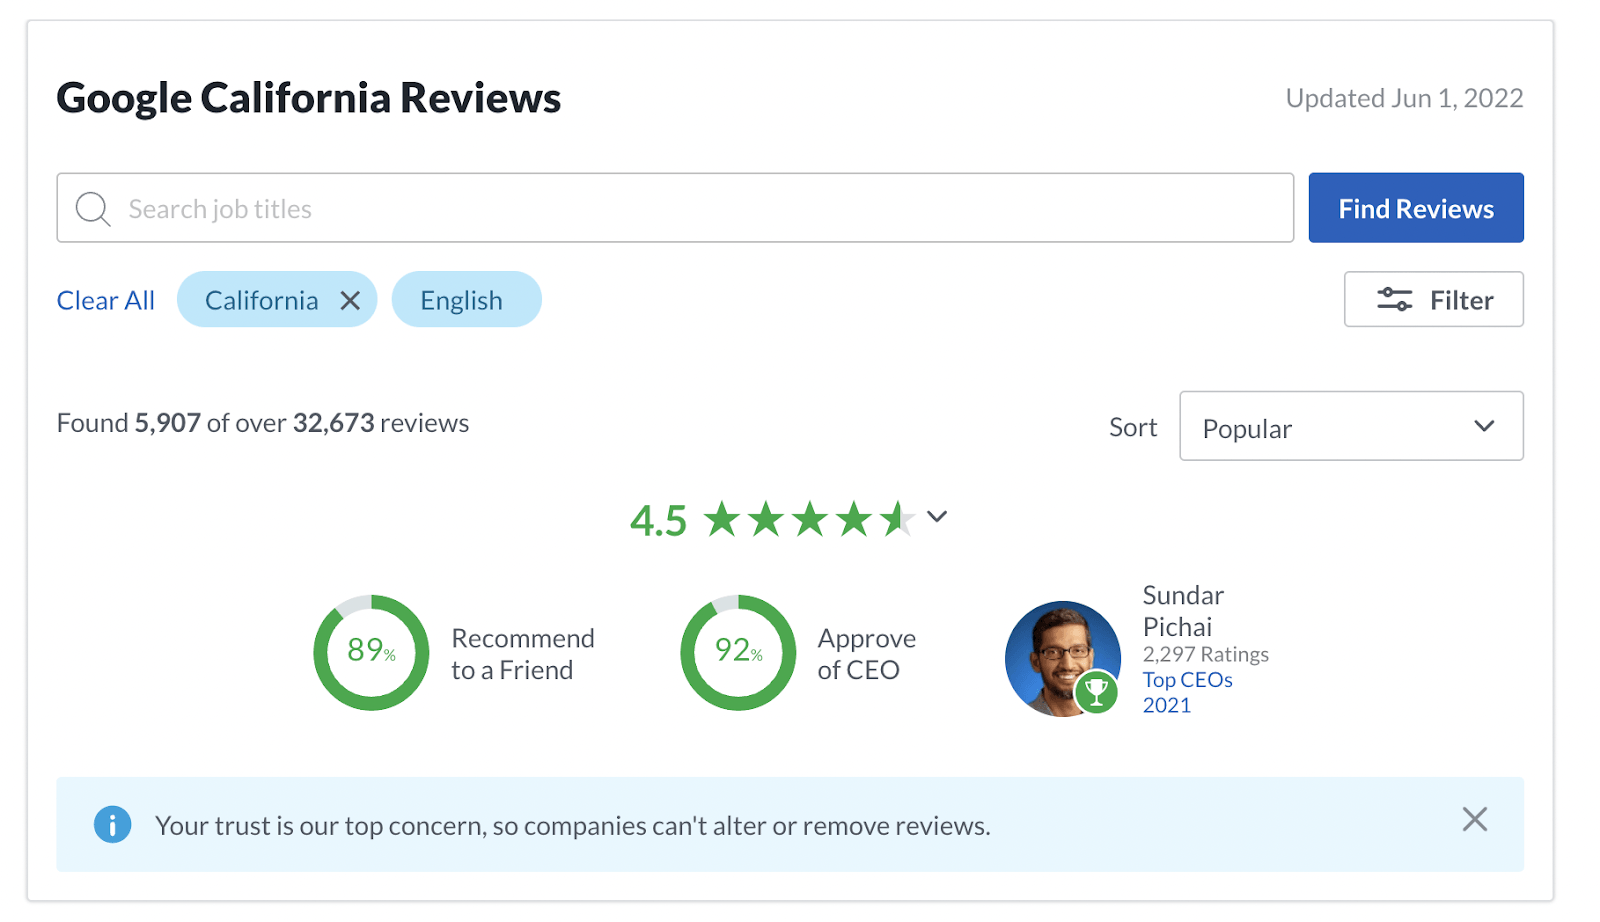 Google California Reviews. 89% would recommend to a friend. 92% approve of the CEO. Sundar Pichai 2,297 ratings. Top CEOs 2021.